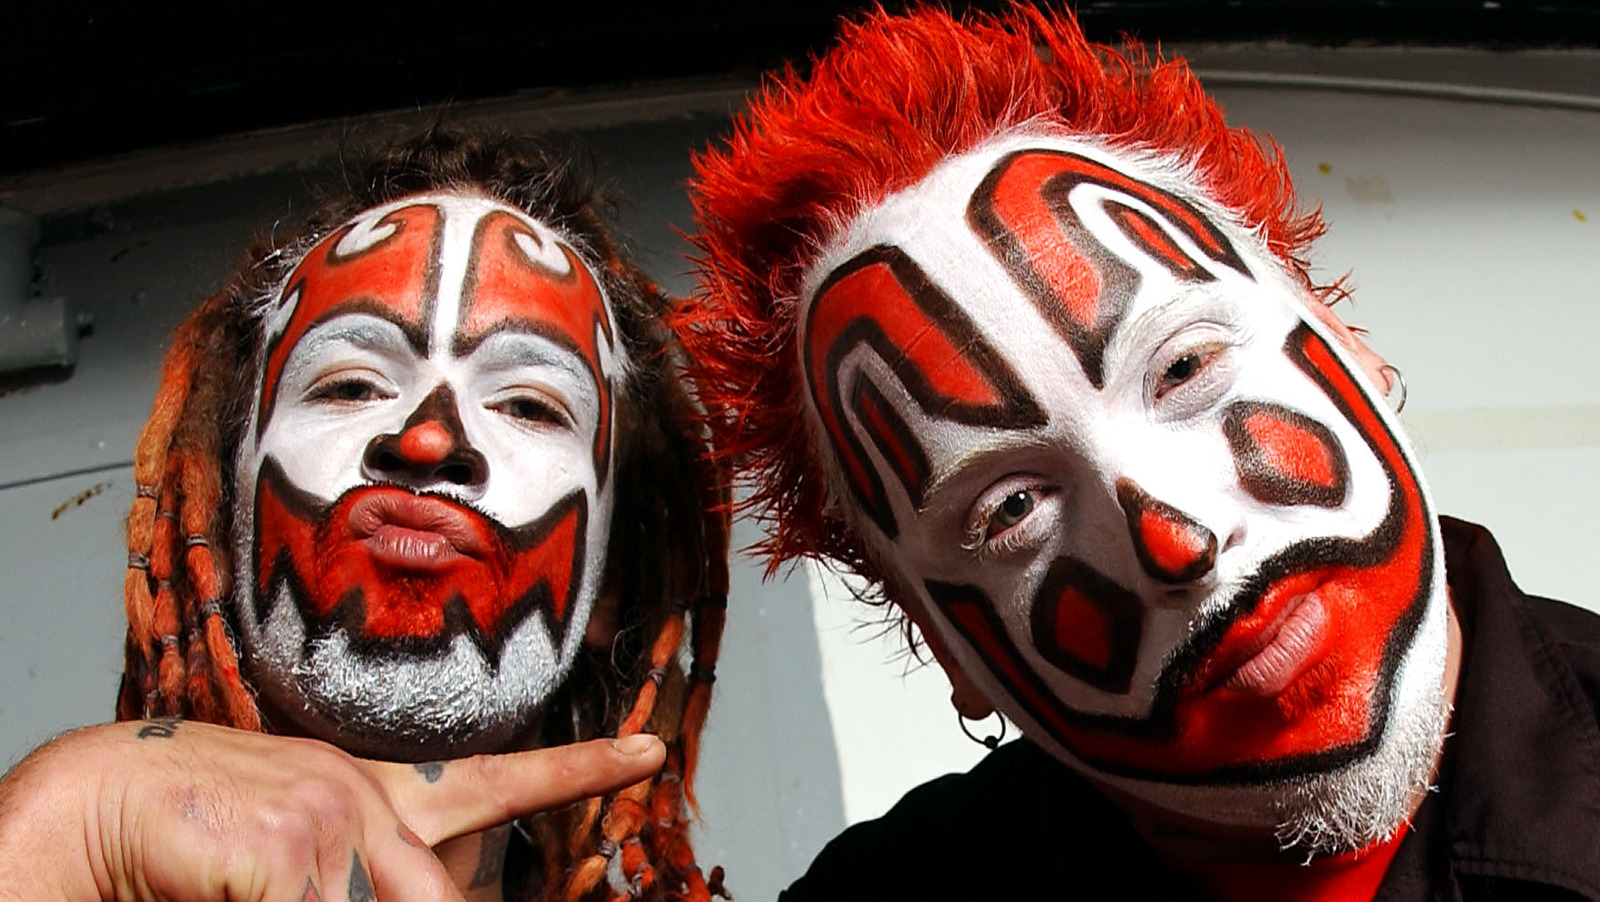 Last chance to get some one of a kind - Insane Clown Posse